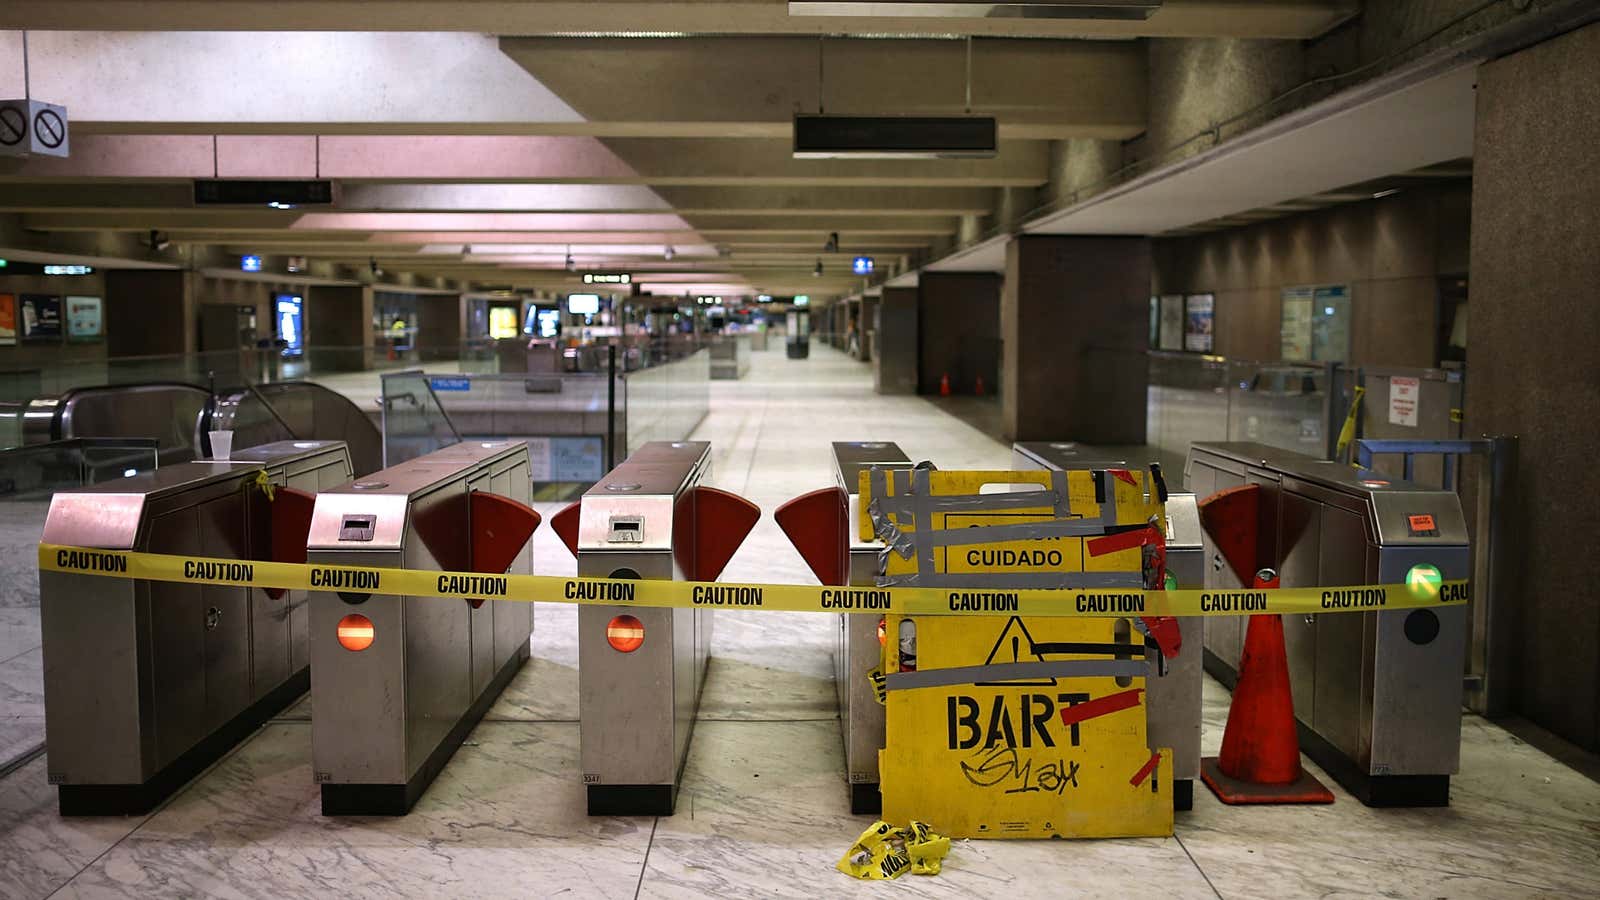 The BART strike in San Francisco epitomizes the inequality problem in the US.